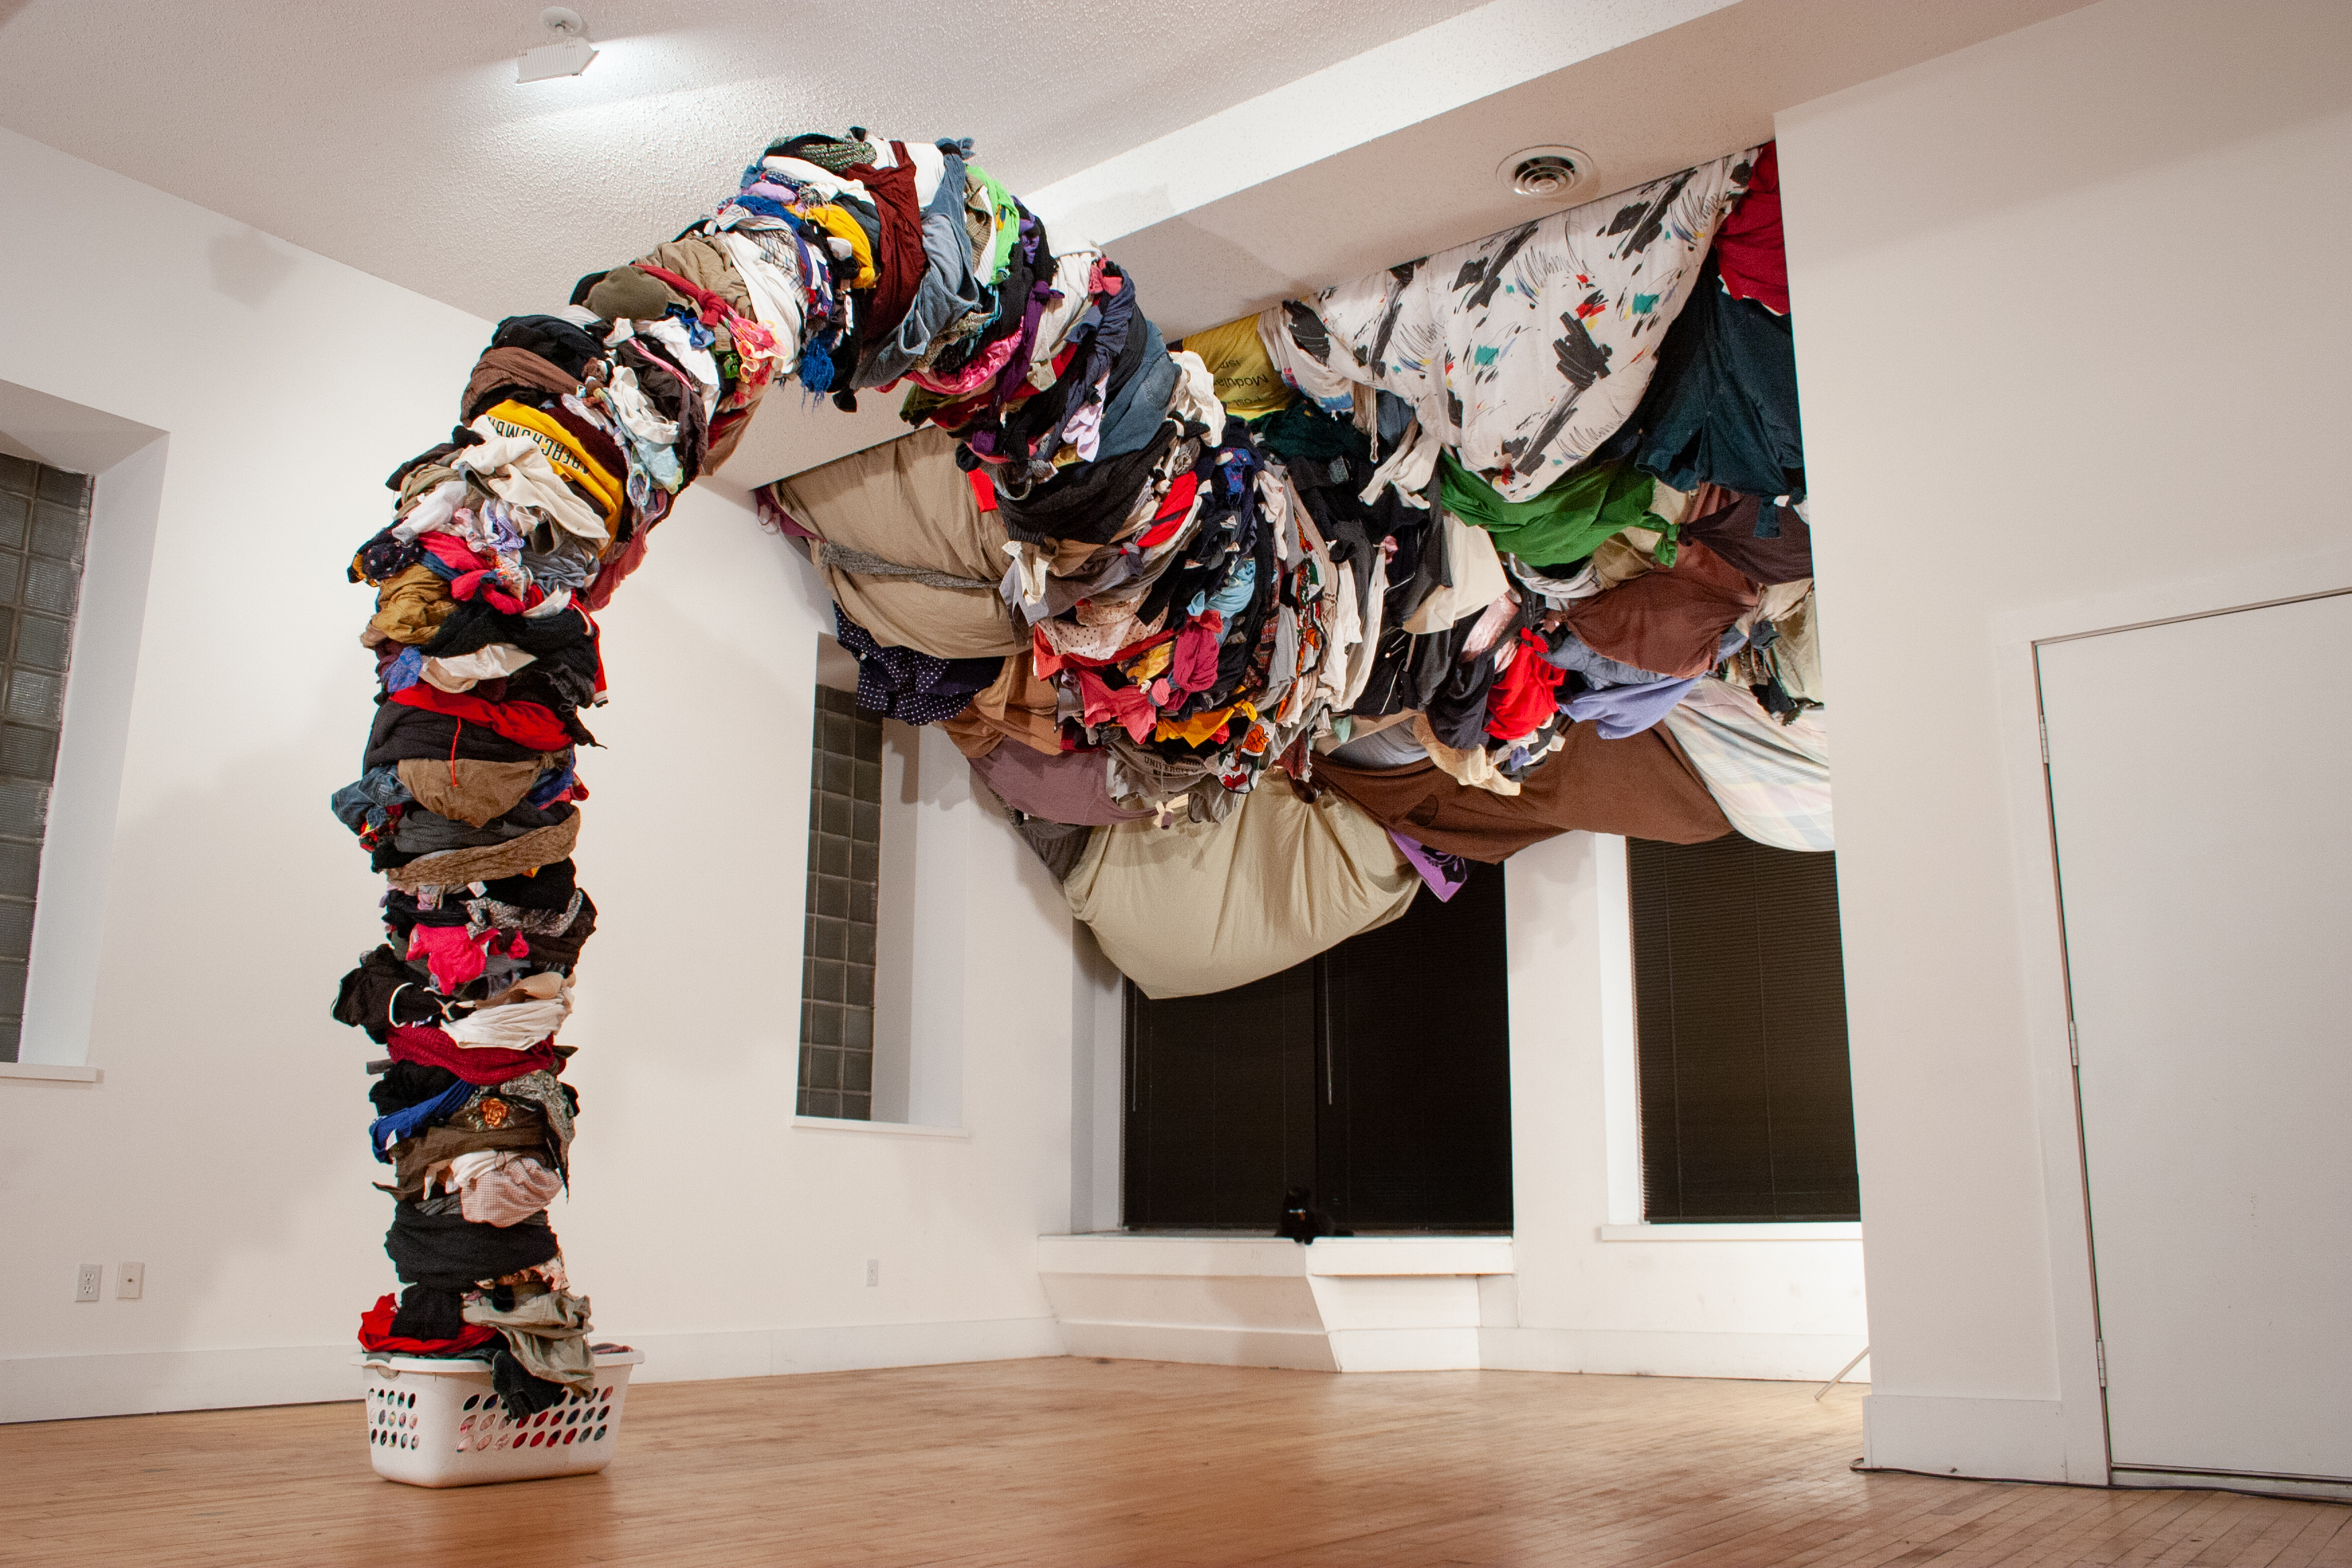 Installation Art - Clothes Pit Since You're Gone by Andy T.